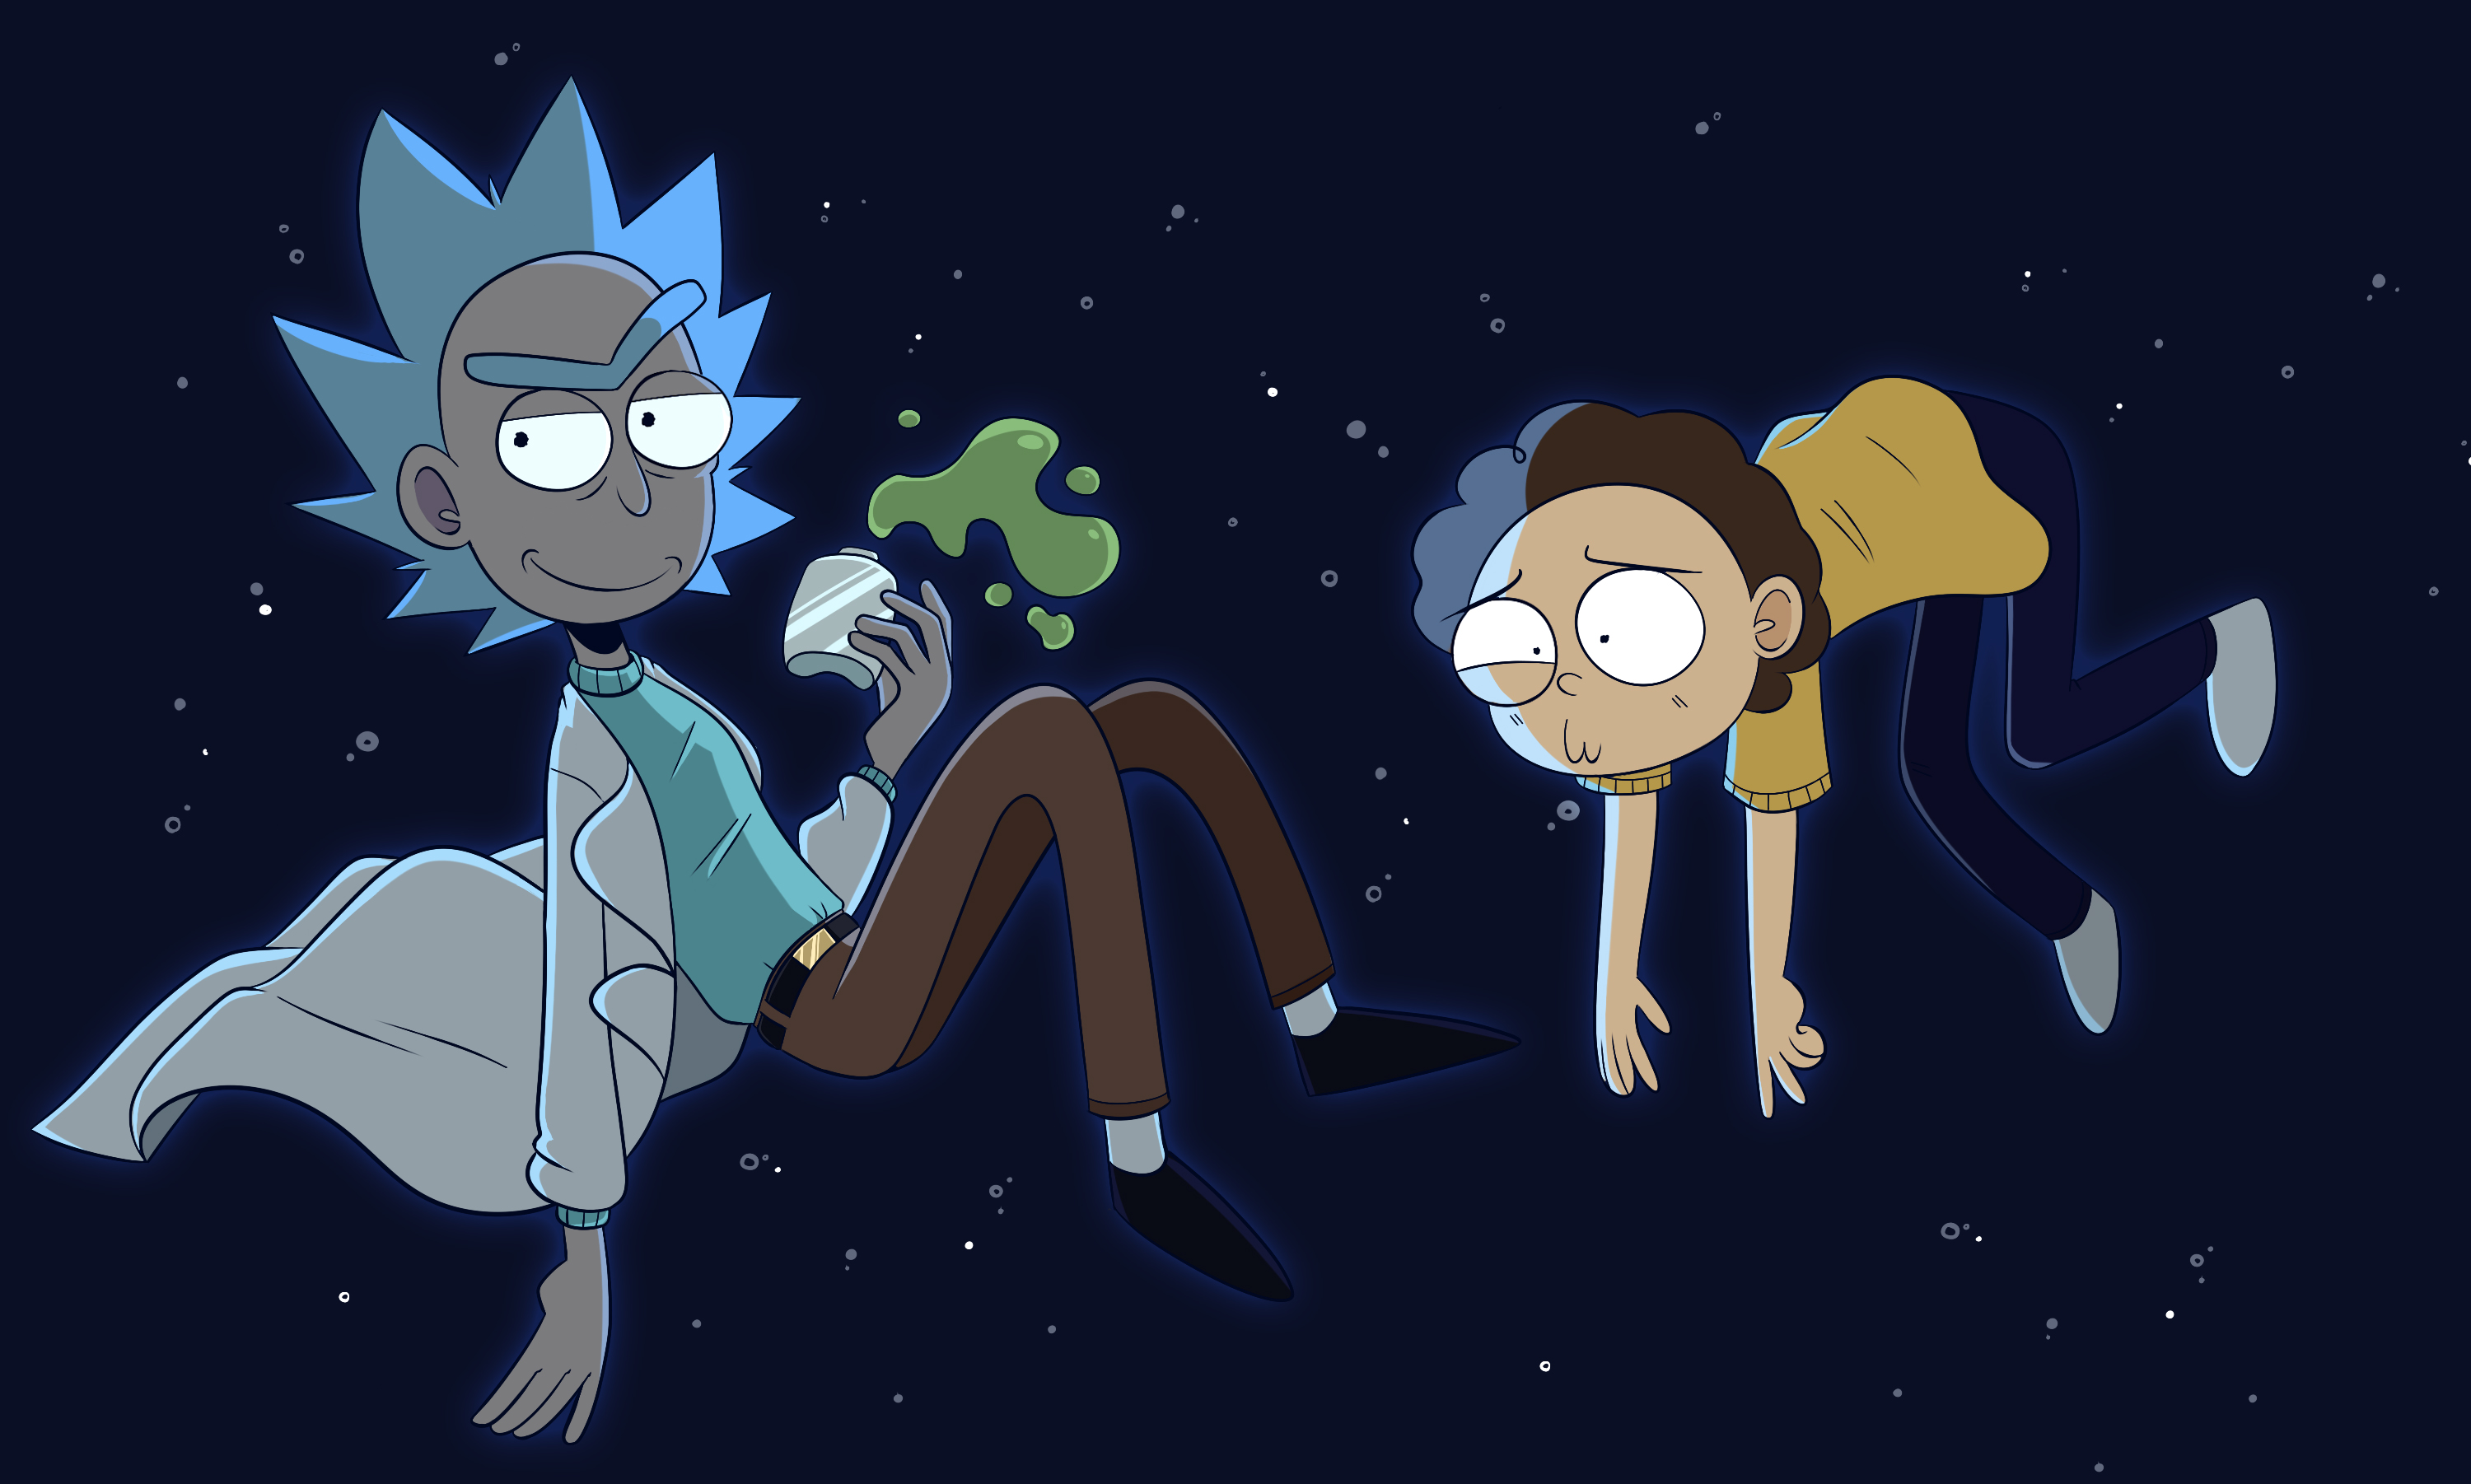 scientist, rick and morty, tv show, morty smith, rick sanchez, space lock screen backgrounds